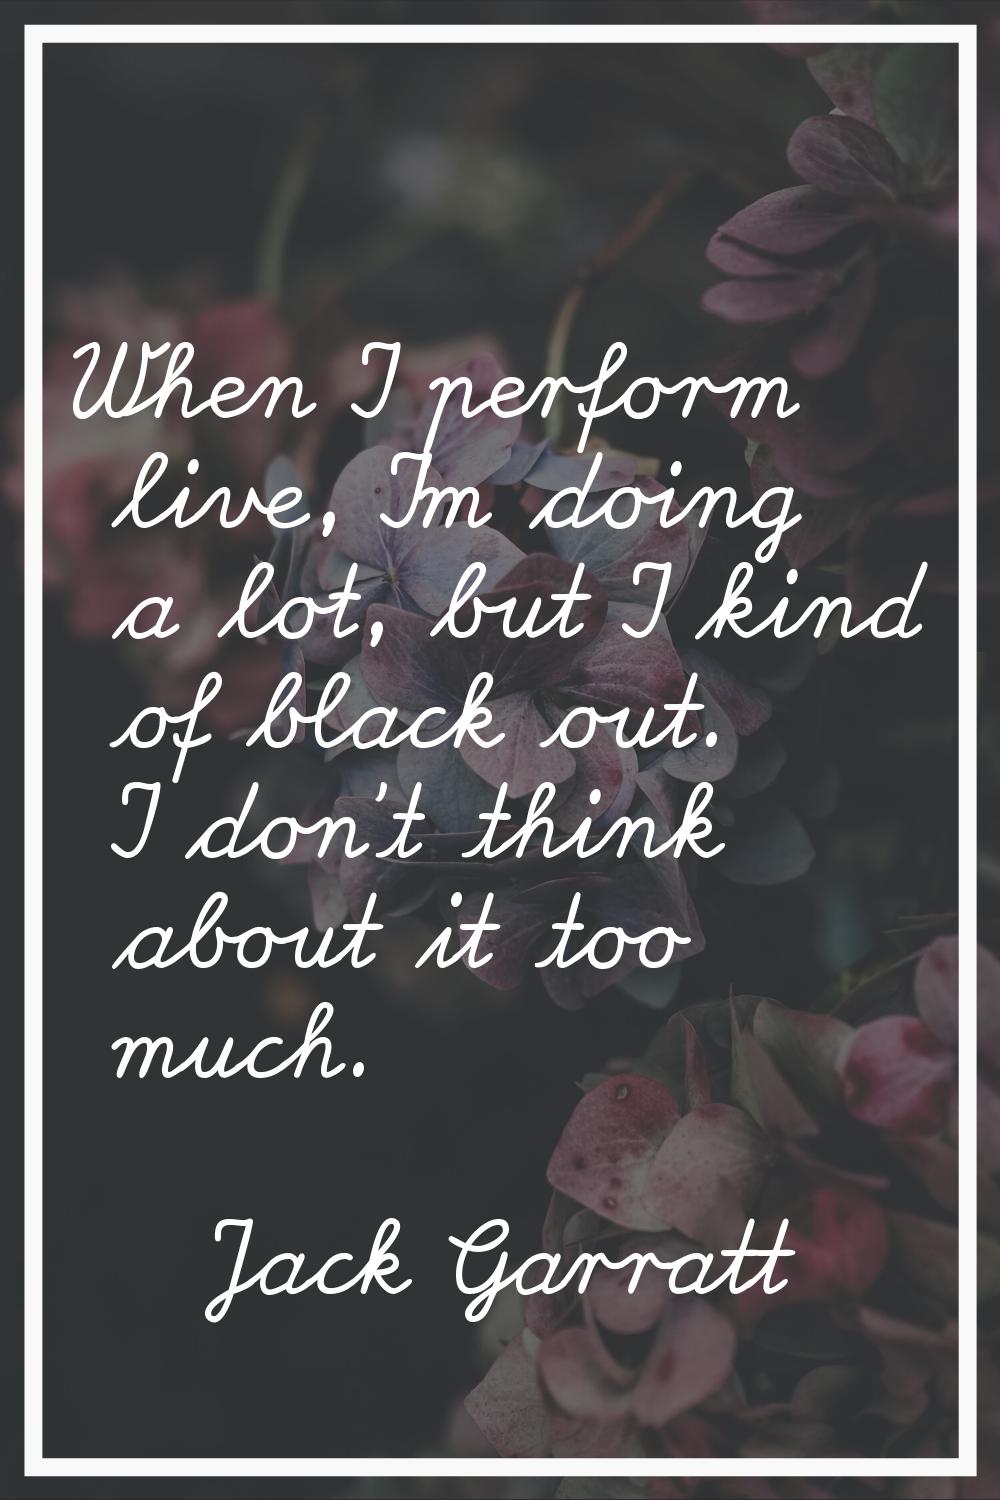 When I perform live, I'm doing a lot, but I kind of black out. I don't think about it too much.